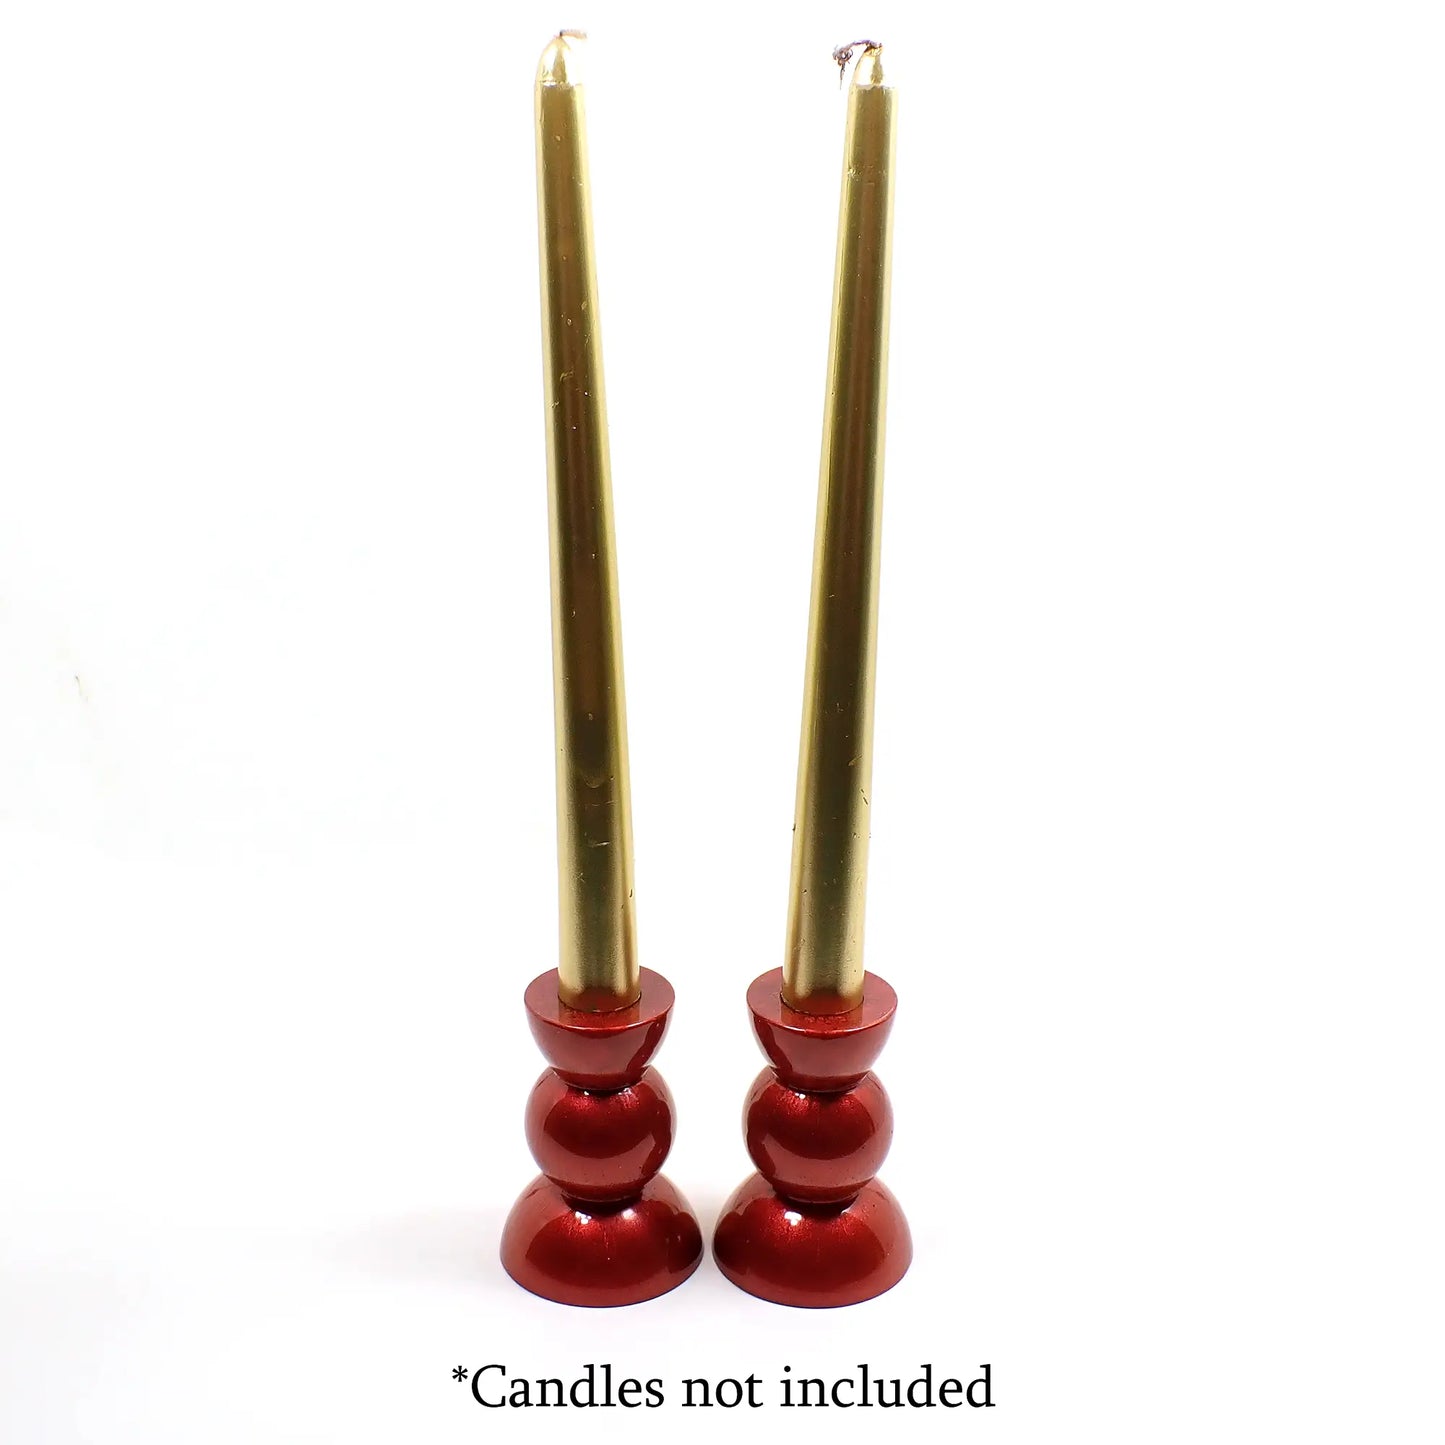 Set of Two Handmade Pearly Red Resin Rounded Geometric Candlestick Holders